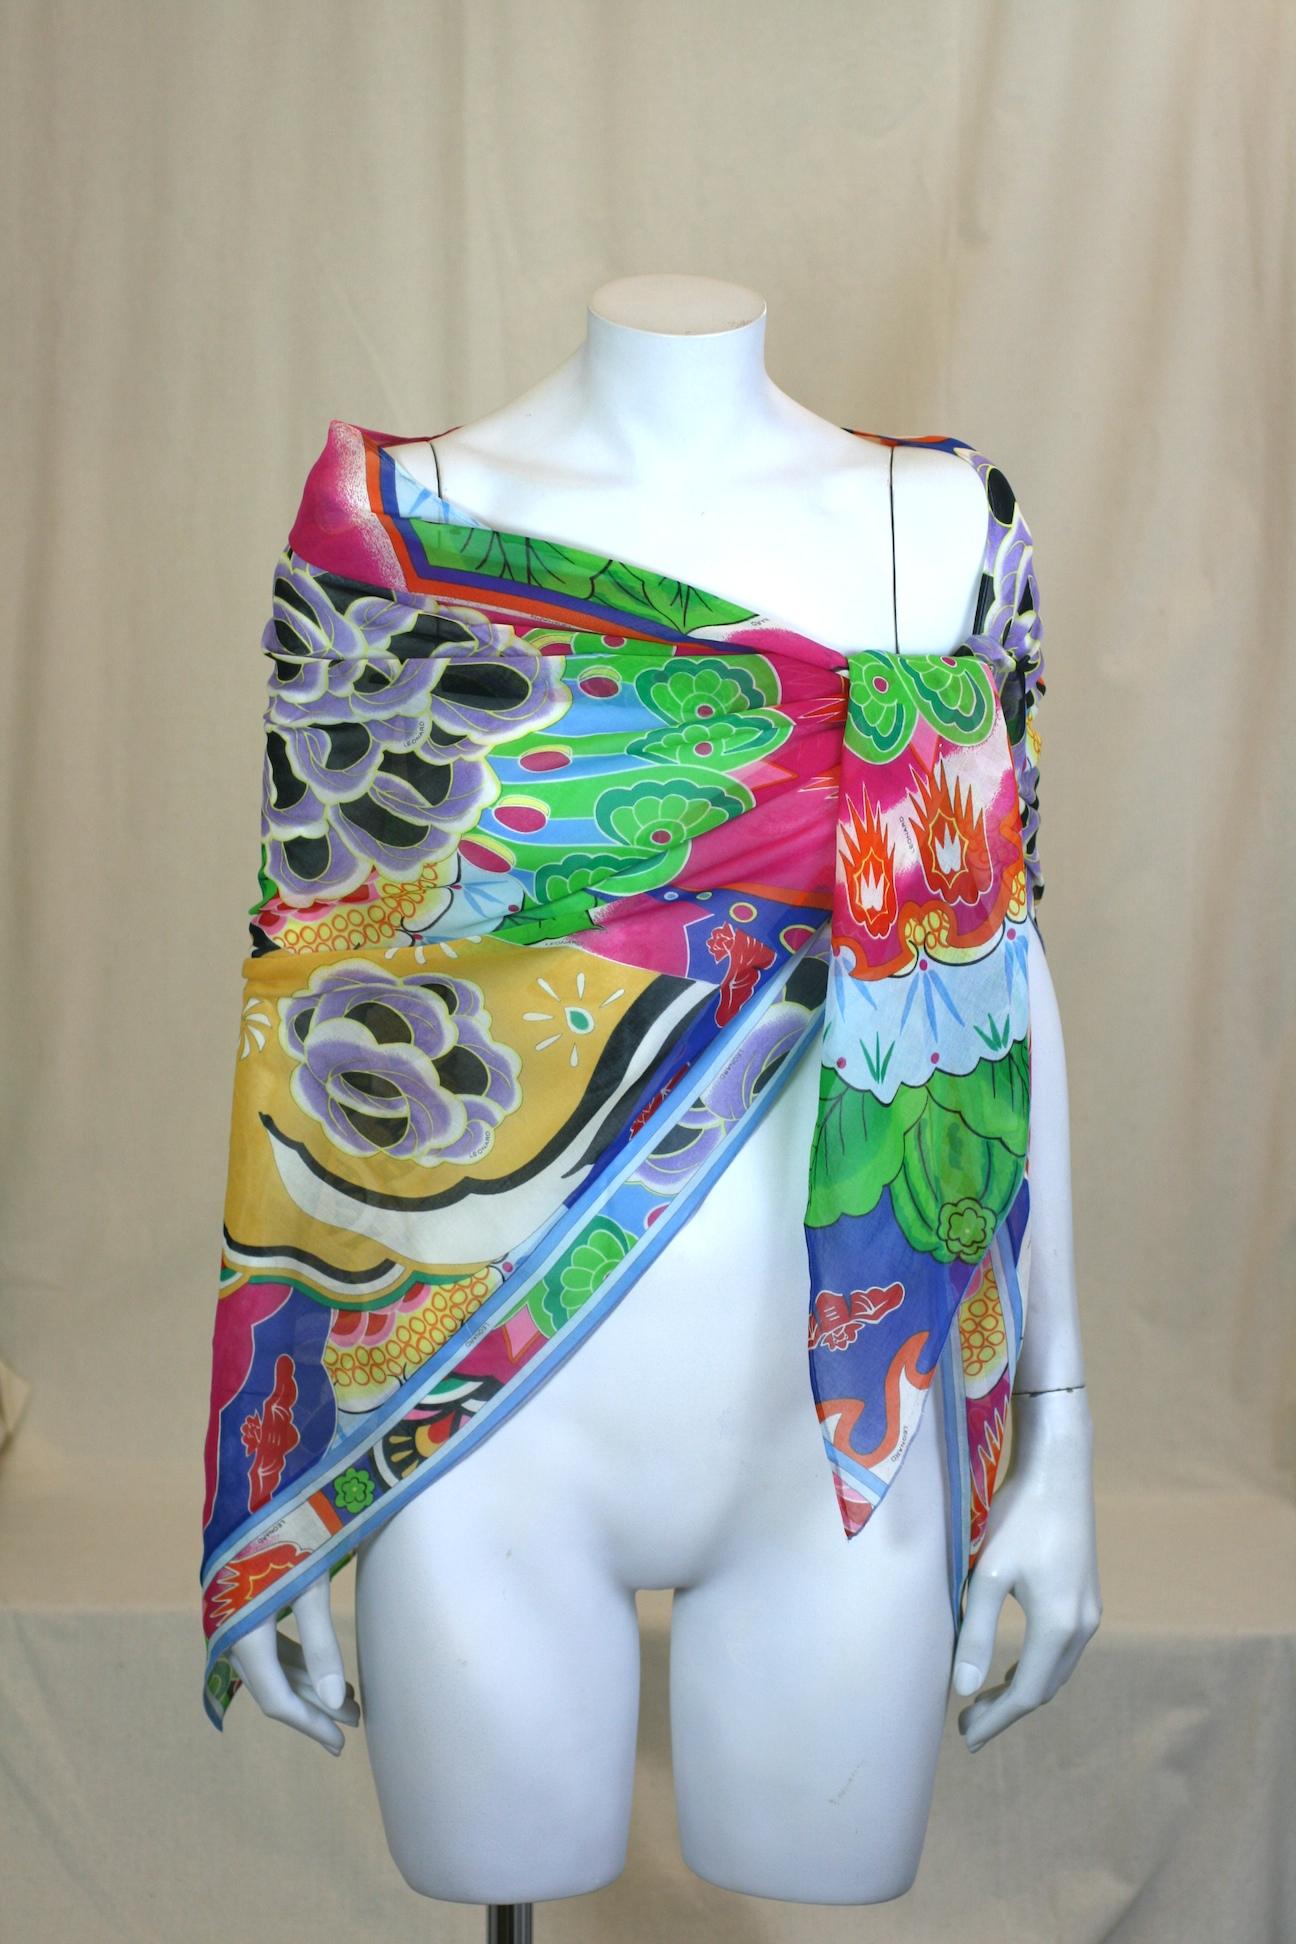 Leonard, Paris Koi Fish Wrap printed with Japonesque motifs in exuberant tones. Likely designed as an after beach wrap, but, works beautifully as a shoulder wrap. Triangular form with incredible colorations. The 